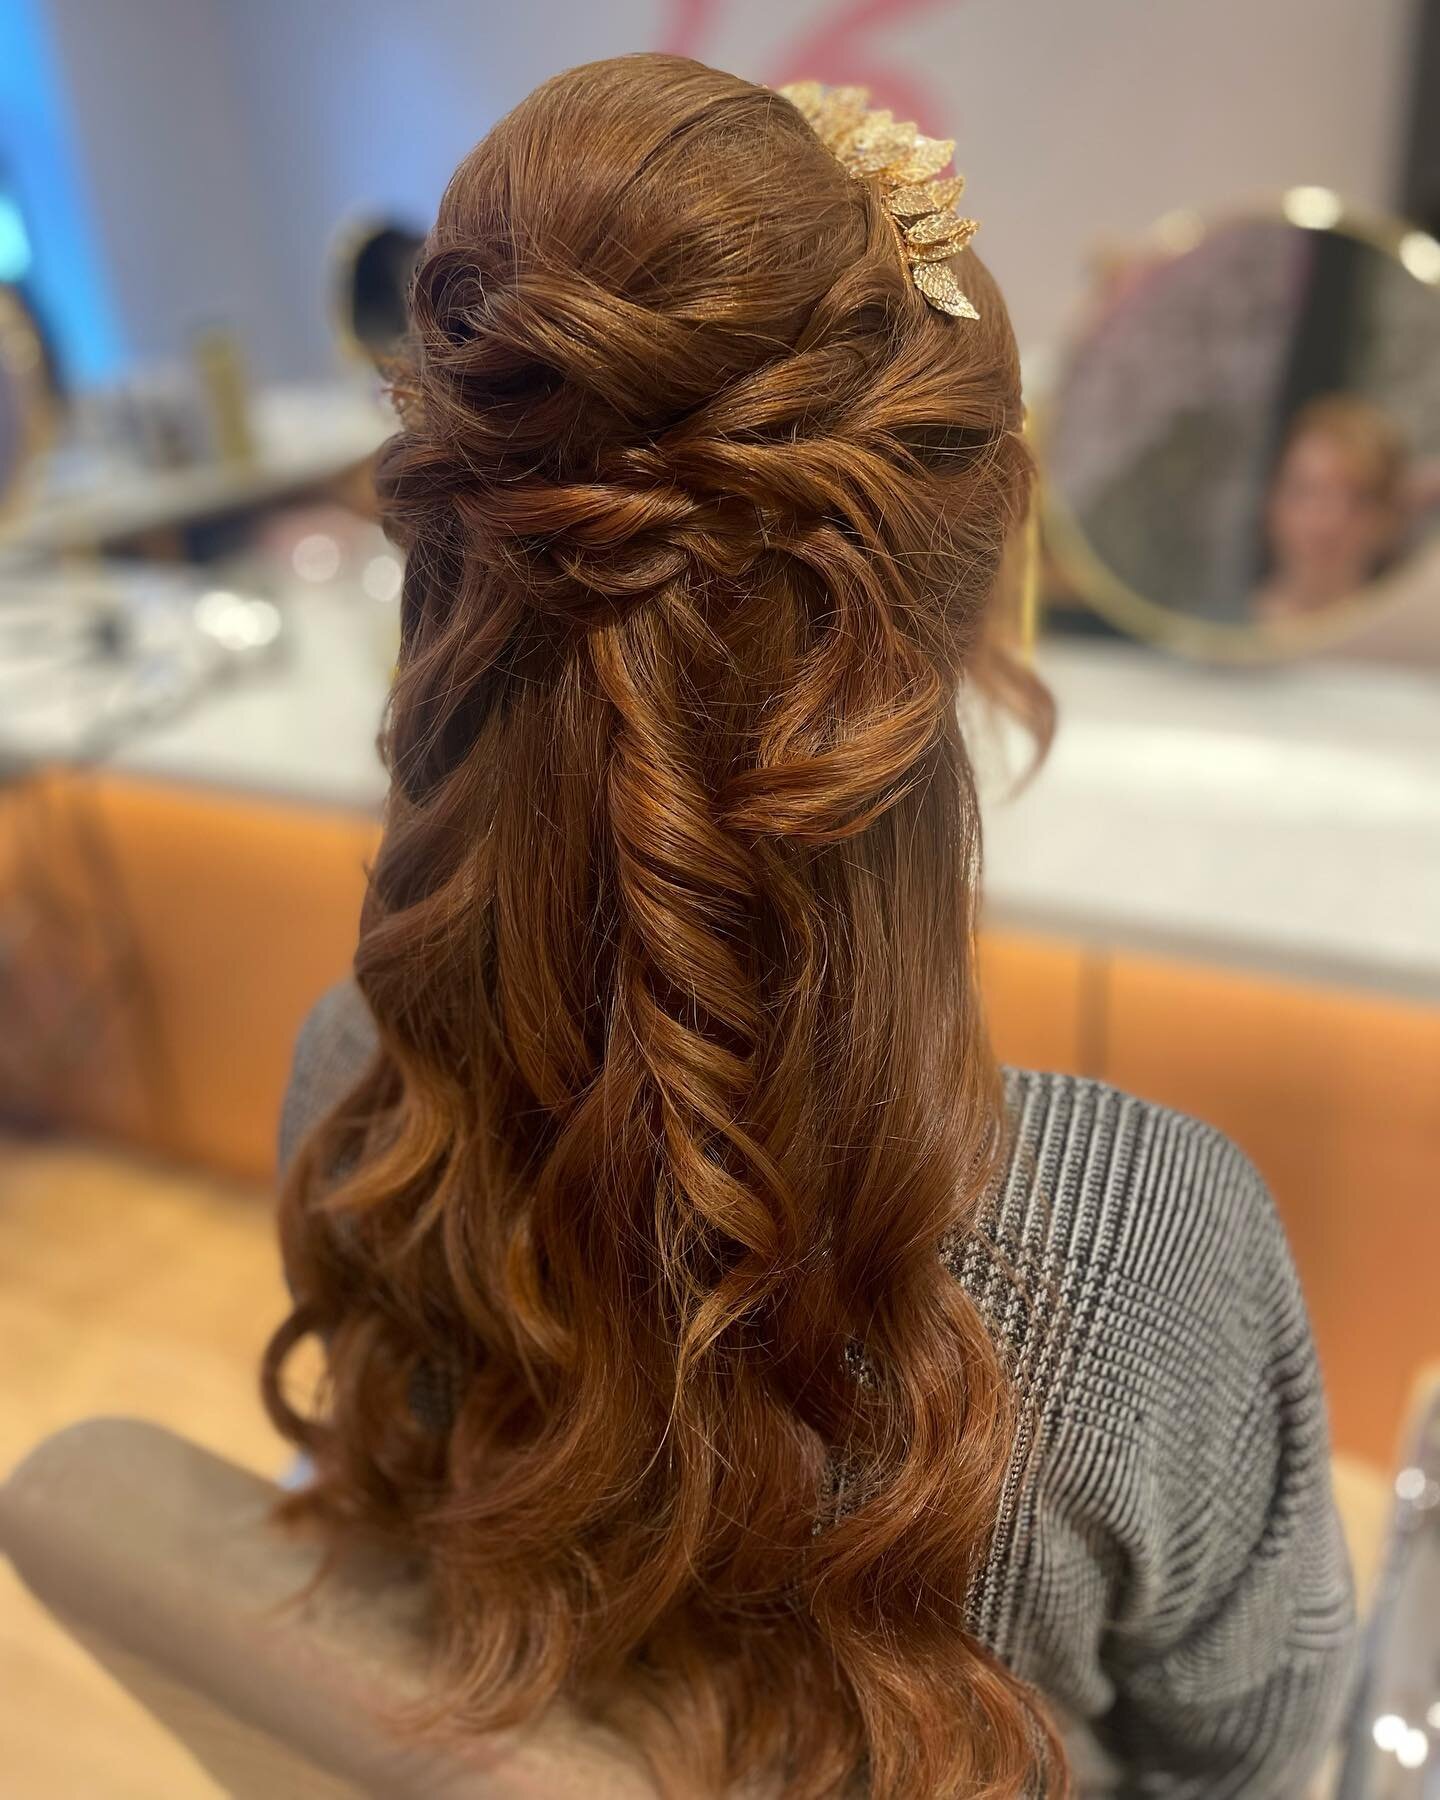 🍂🧡🍂🧡🍂🧡 

Wedding glam ✨ the most elegant upstyle which can be worn for any occasion ❤️ 

@courtneymurphy_hairstylist 

📍Wicklow St